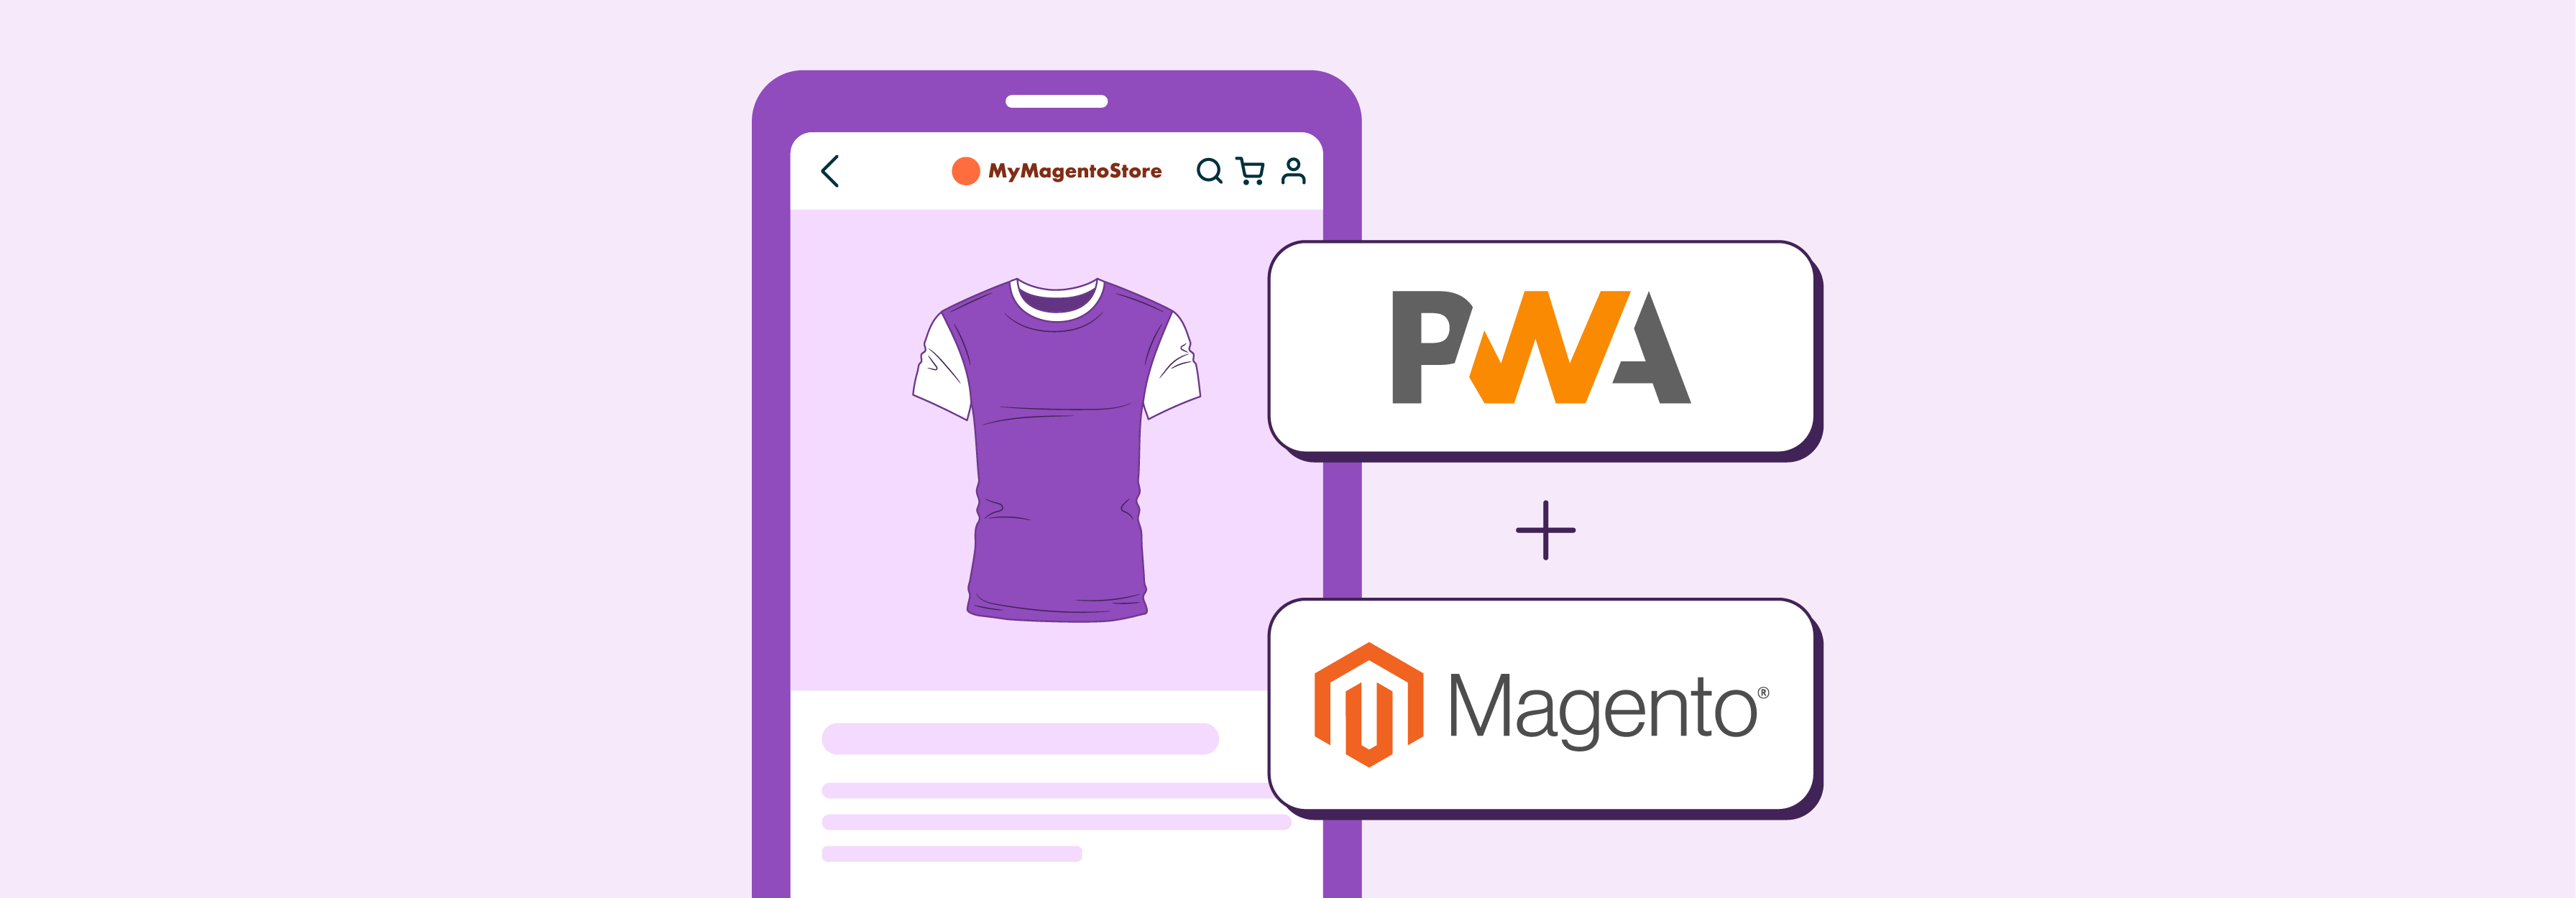 Magento PWA features and benefits.